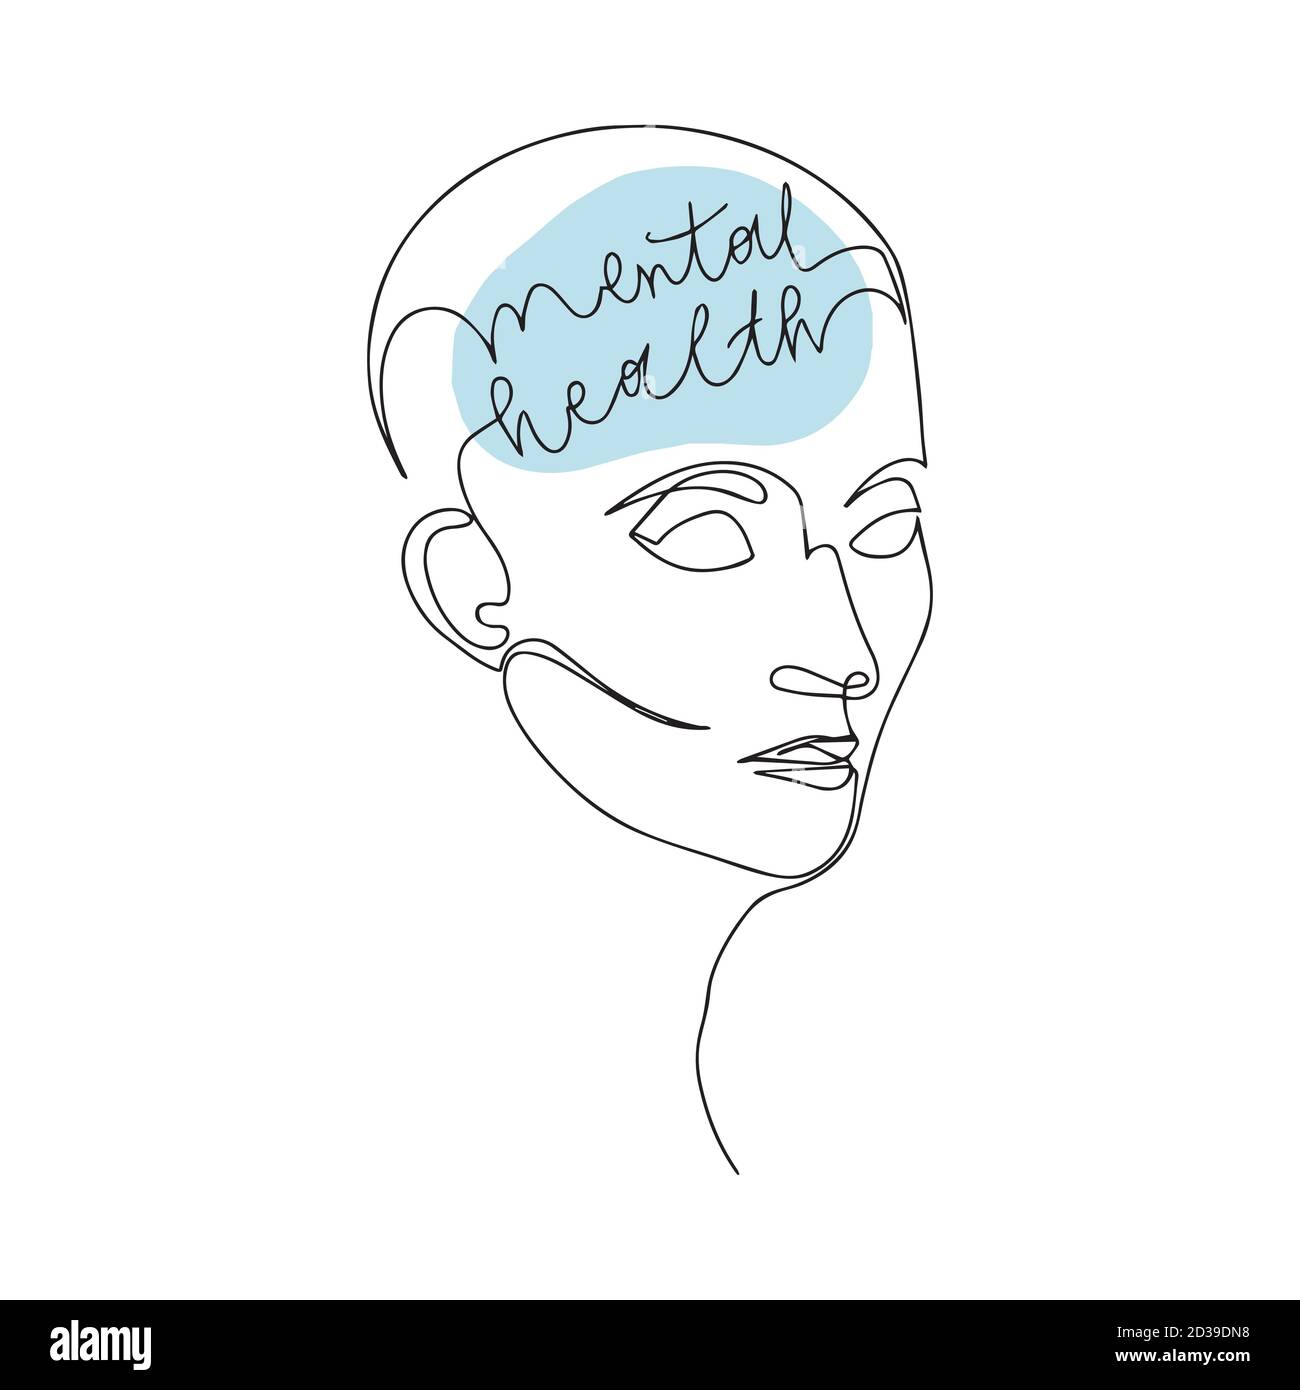 Mental Health For Women. Line Drawing of Human Head With Quote In His